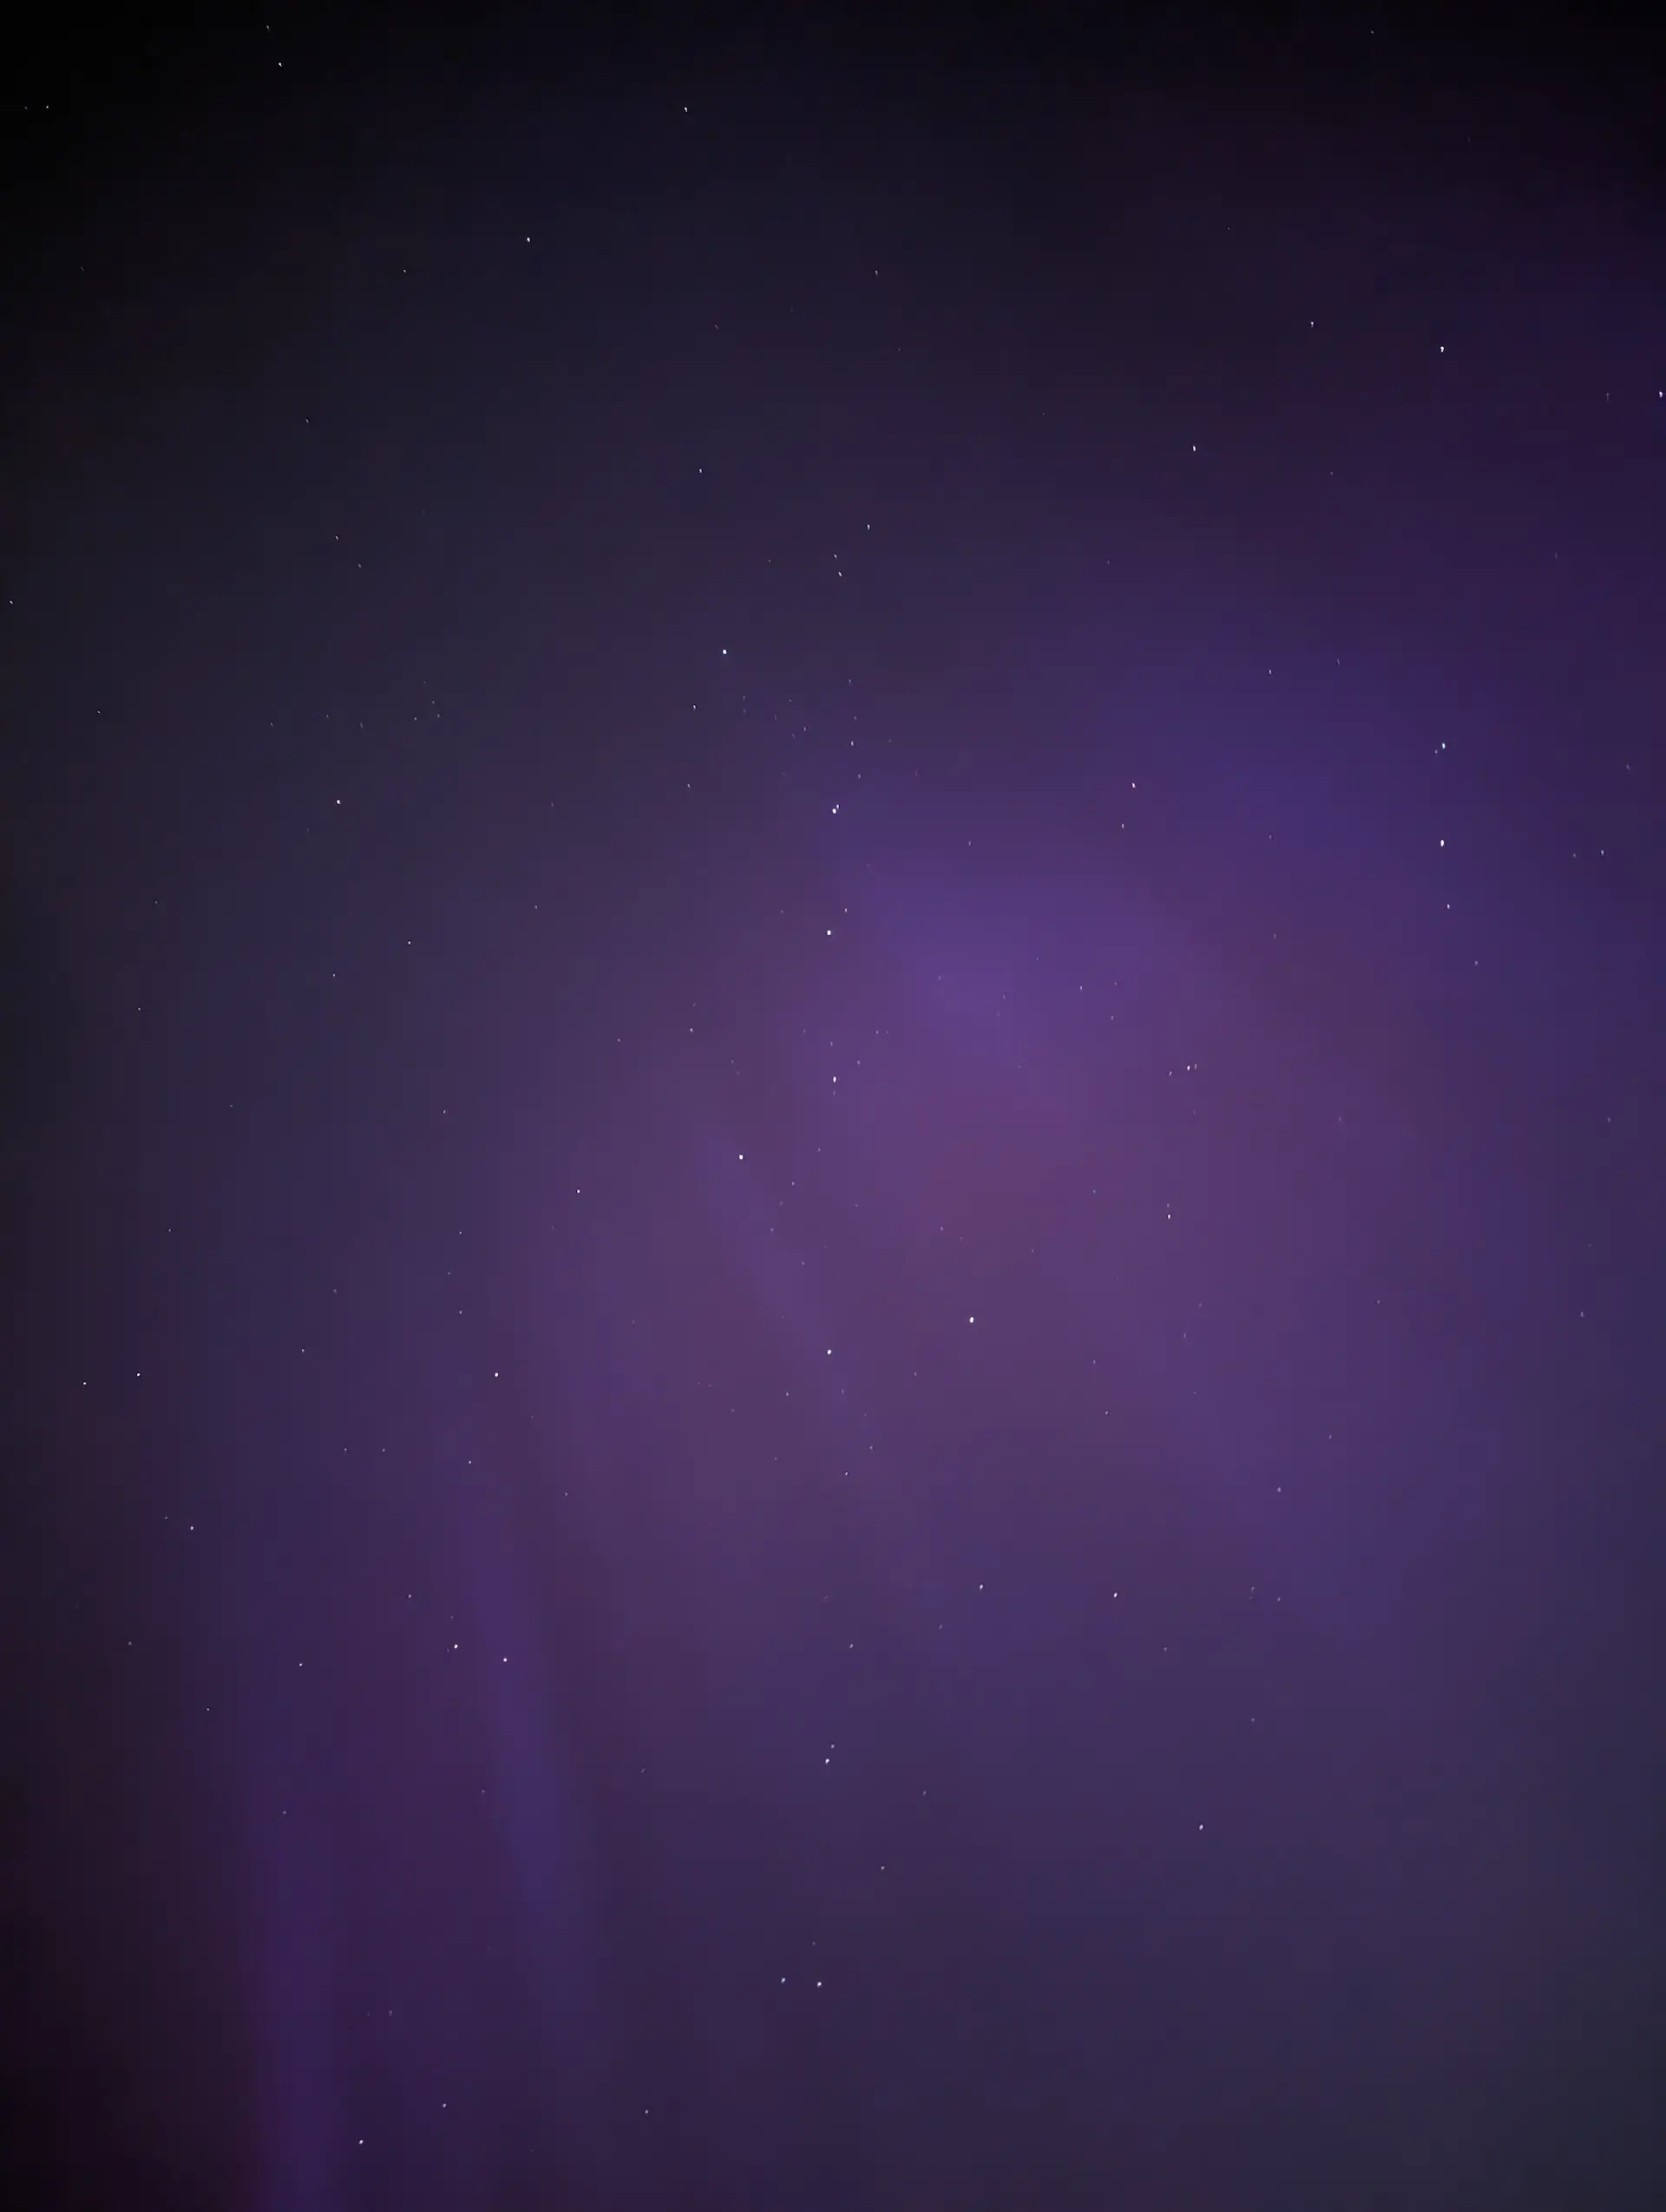 Night sky only with the Big Dipper in the middle with purple Northern Lights.